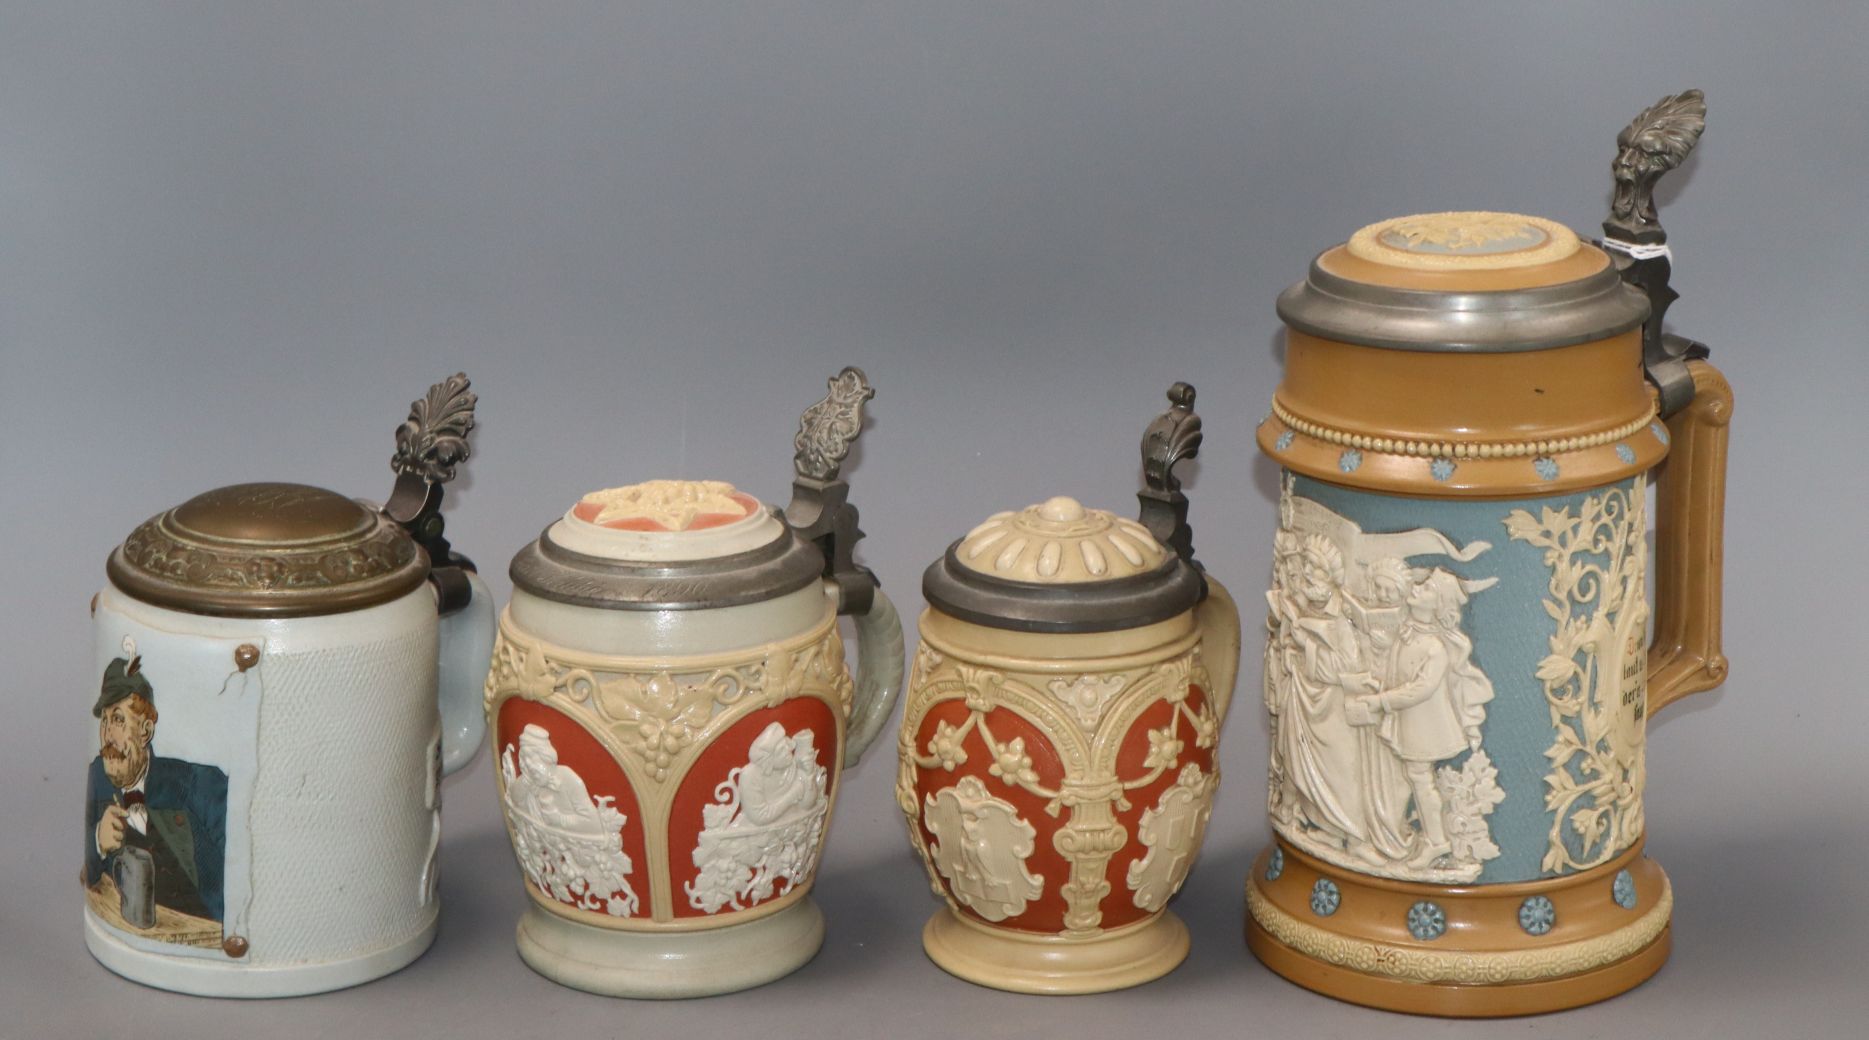 A Mettlach stein decorated with singers and three others